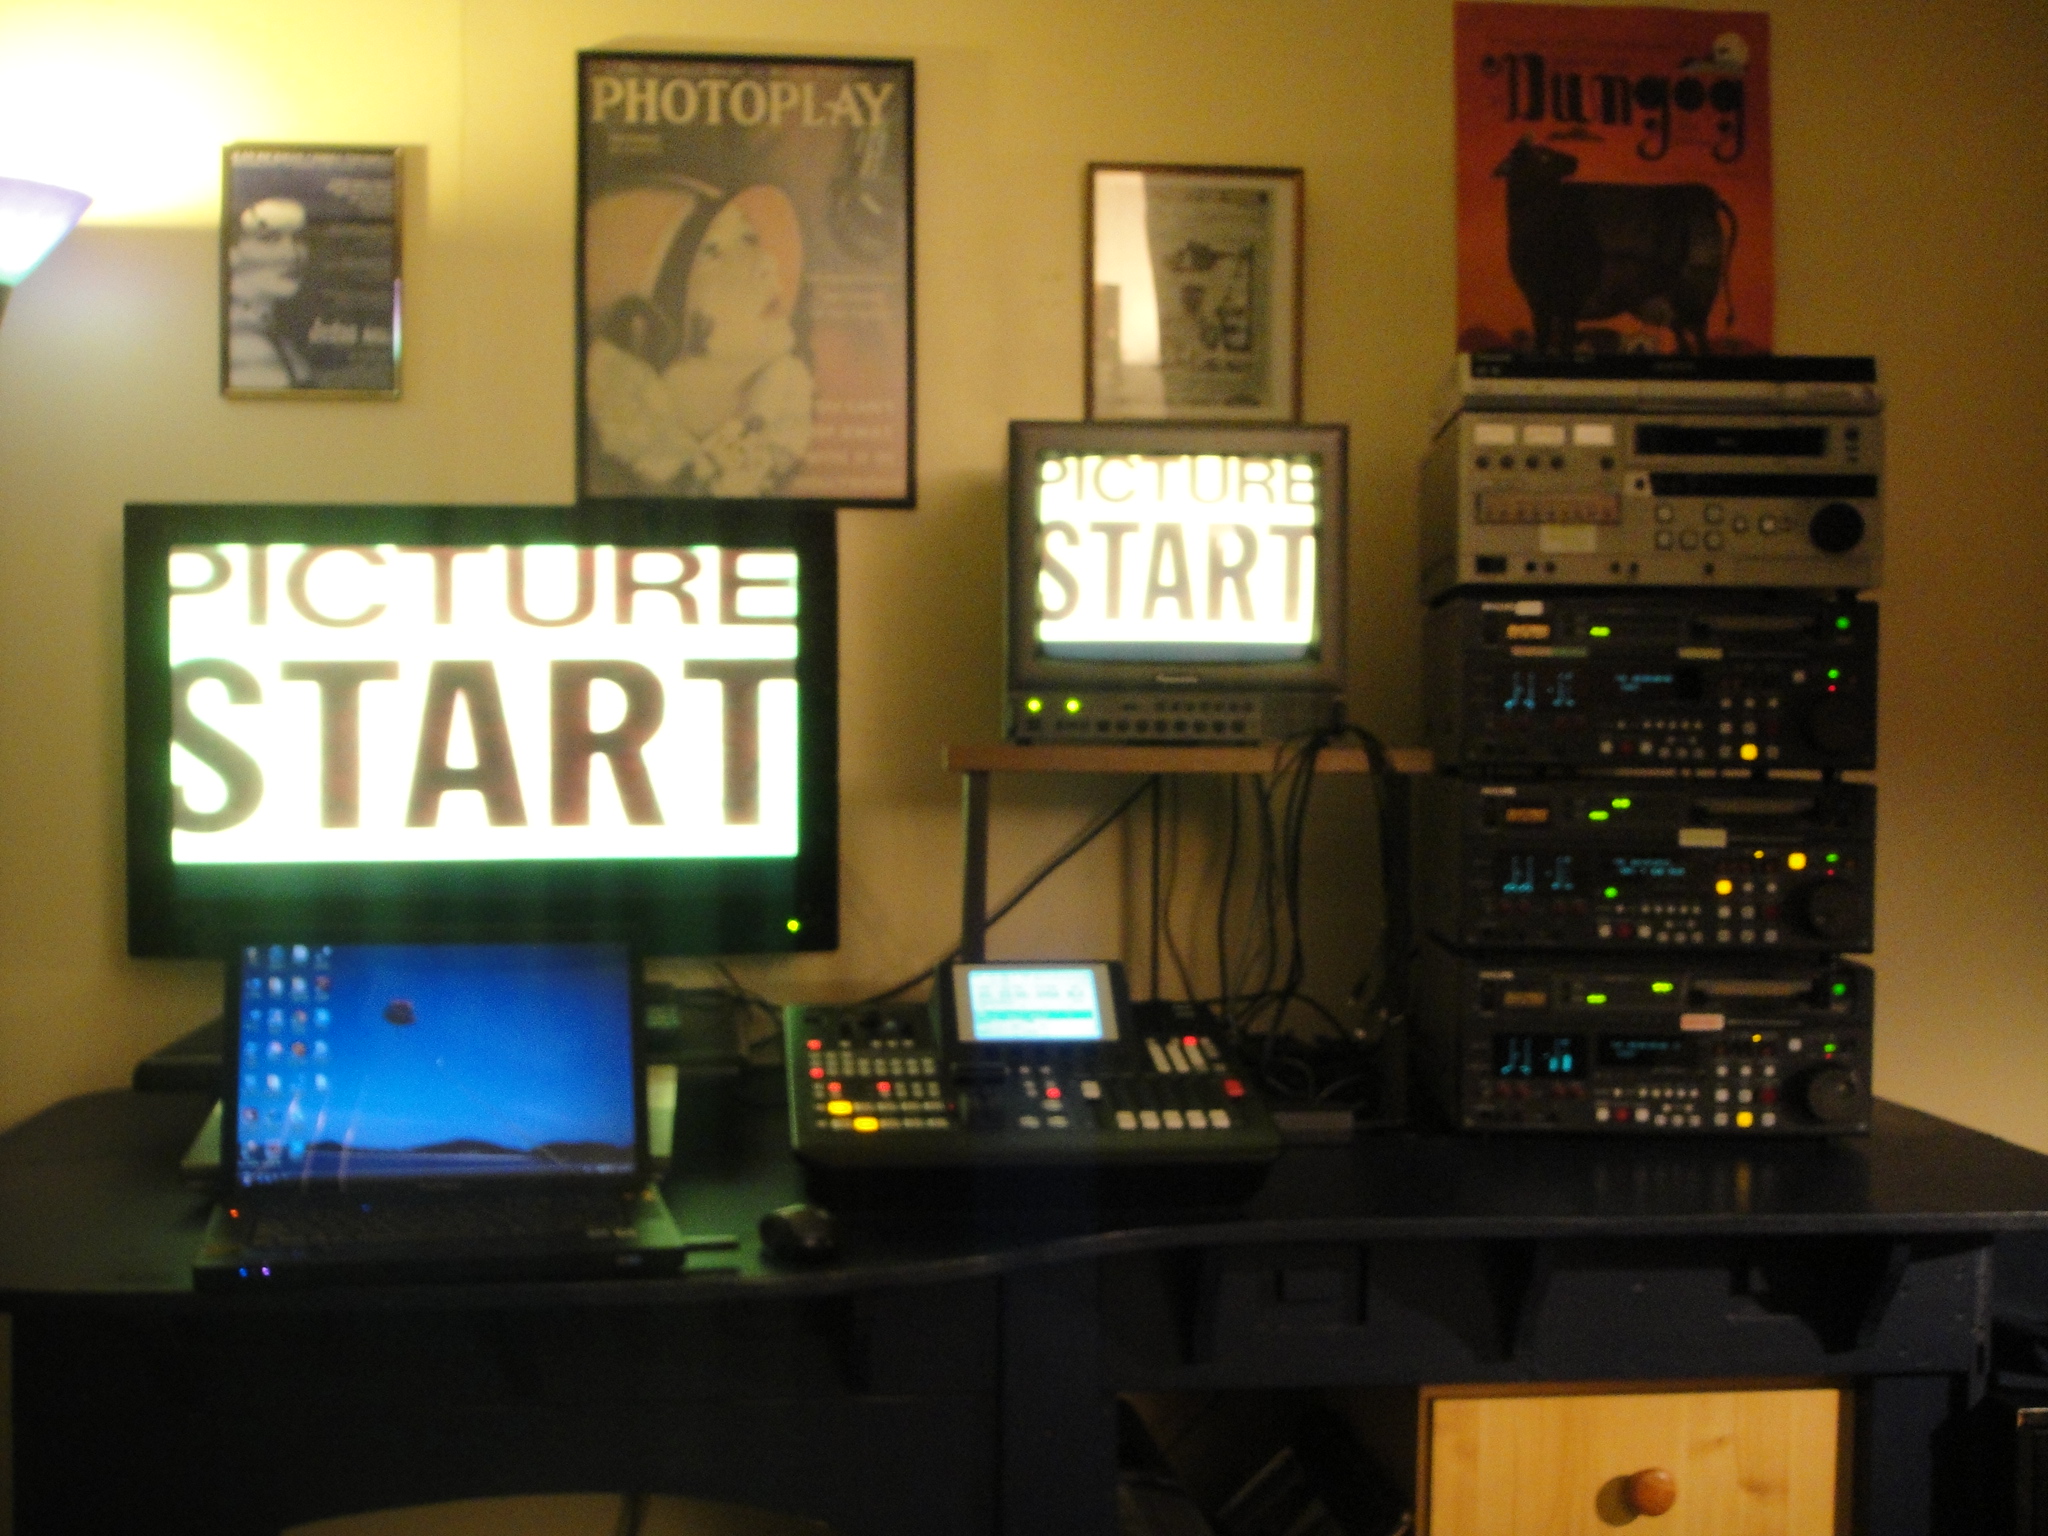 The DVCPRO 750 series edit suite which has served the school well for the past 5 years. Sad to see it go in a way.